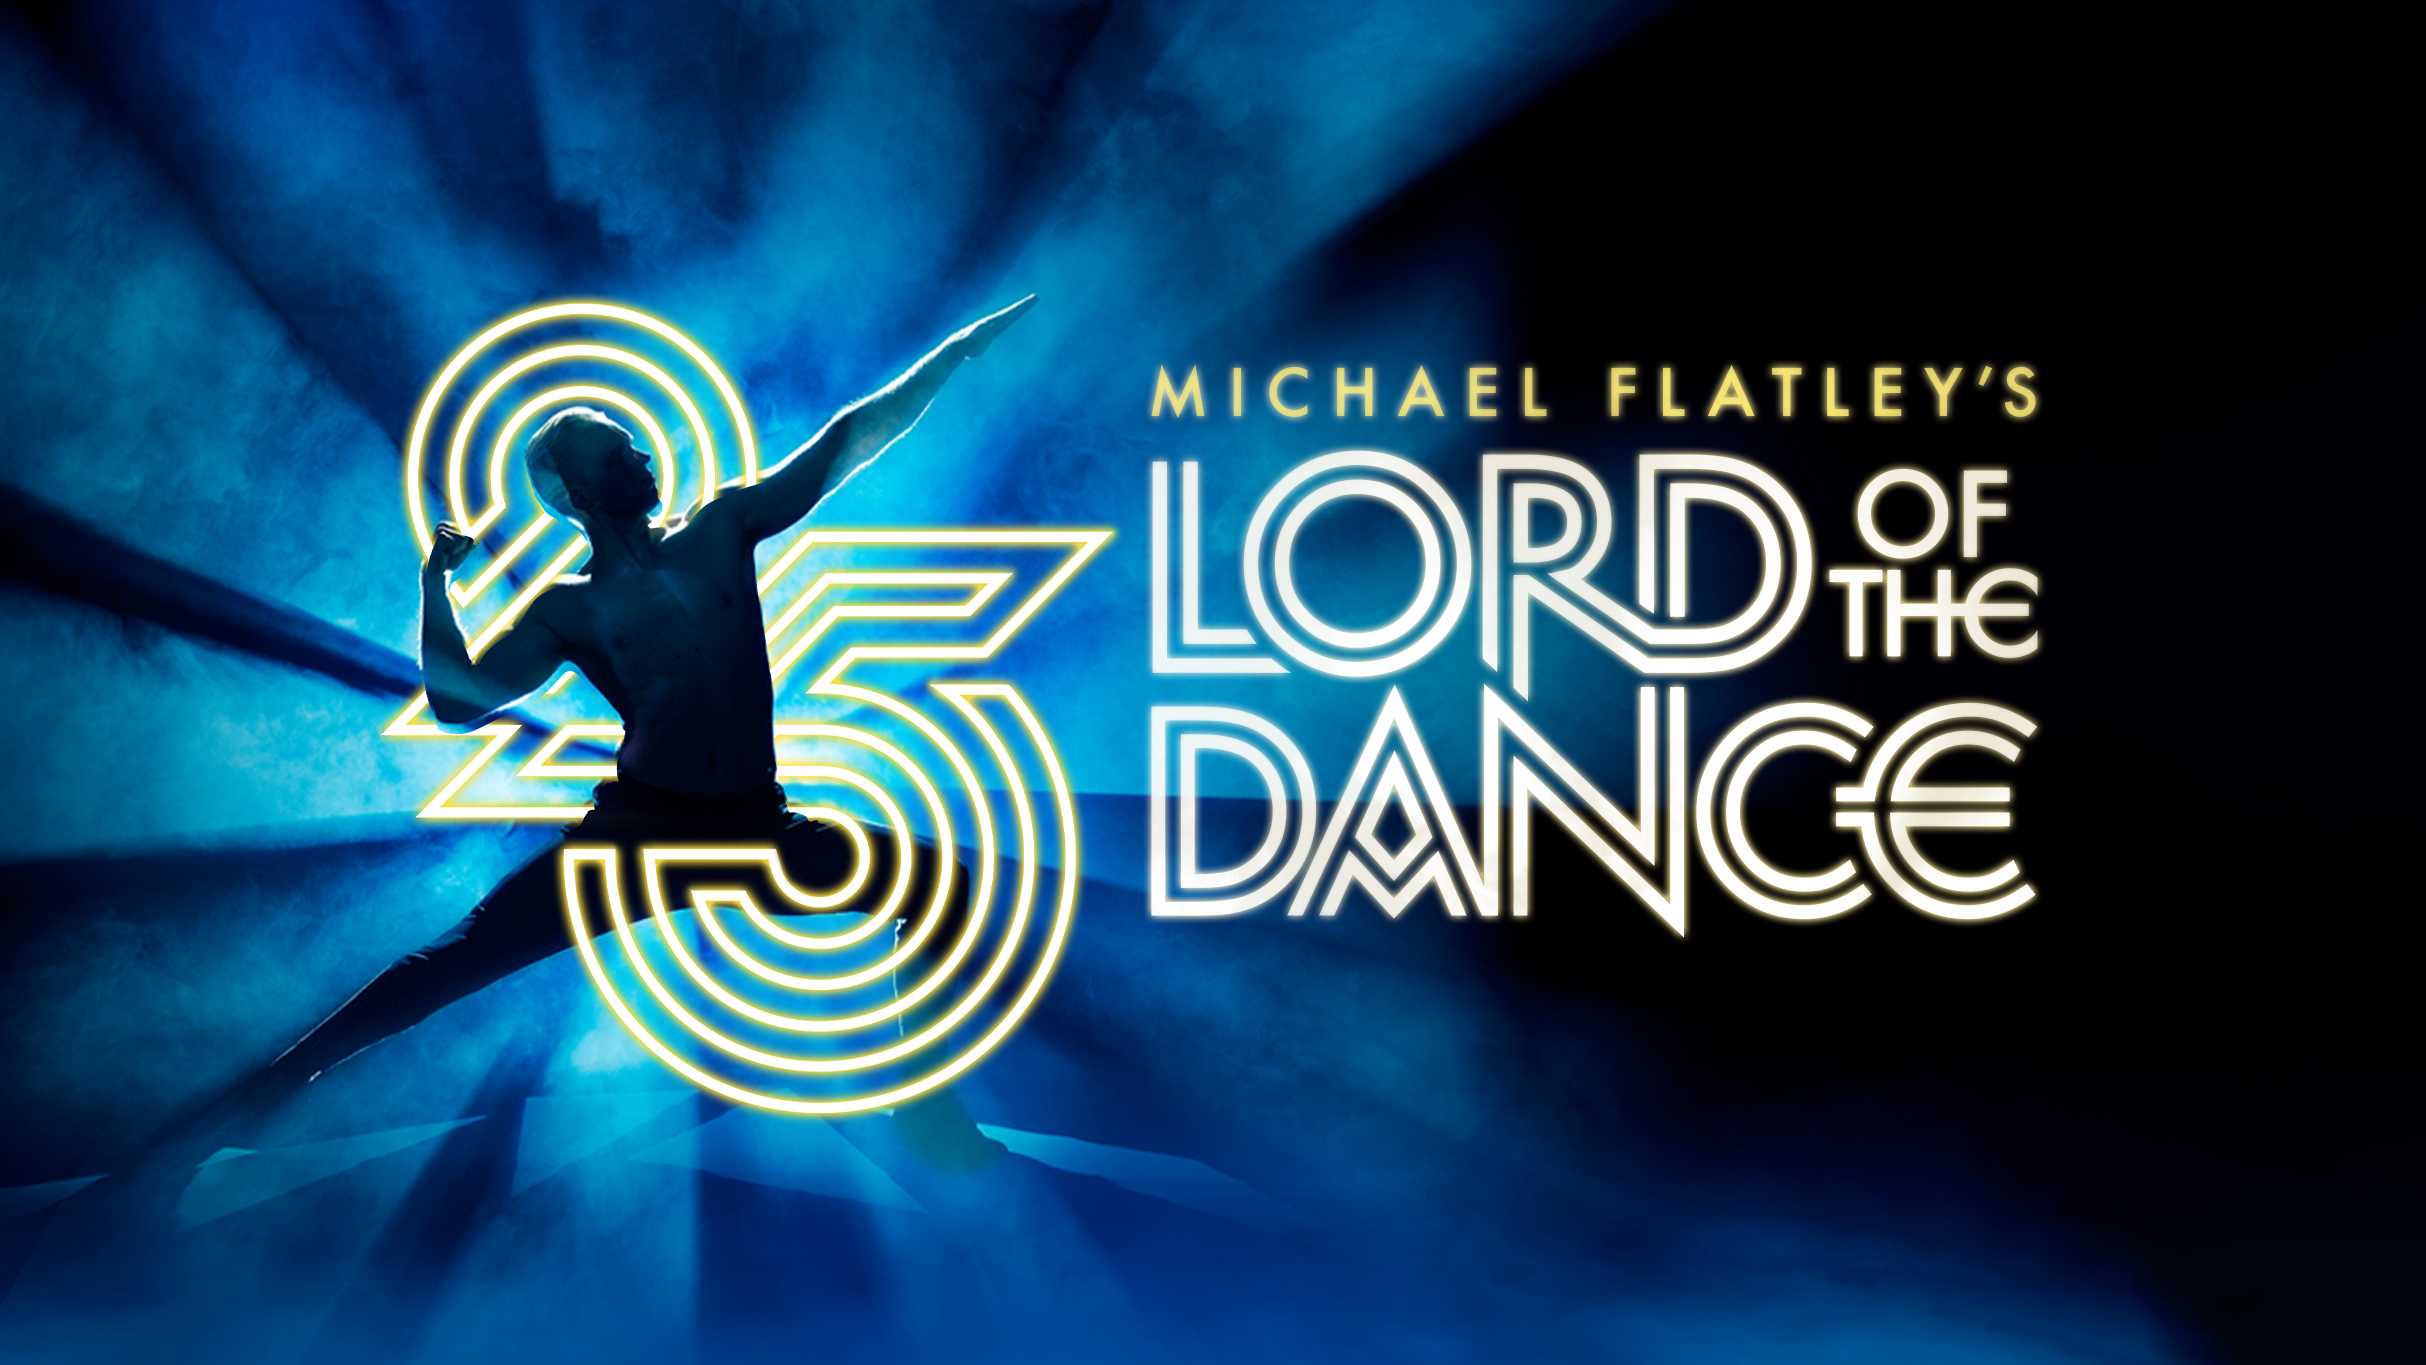 Michael Flatley's Lord Of The Dance- 25th Anniversary Tour